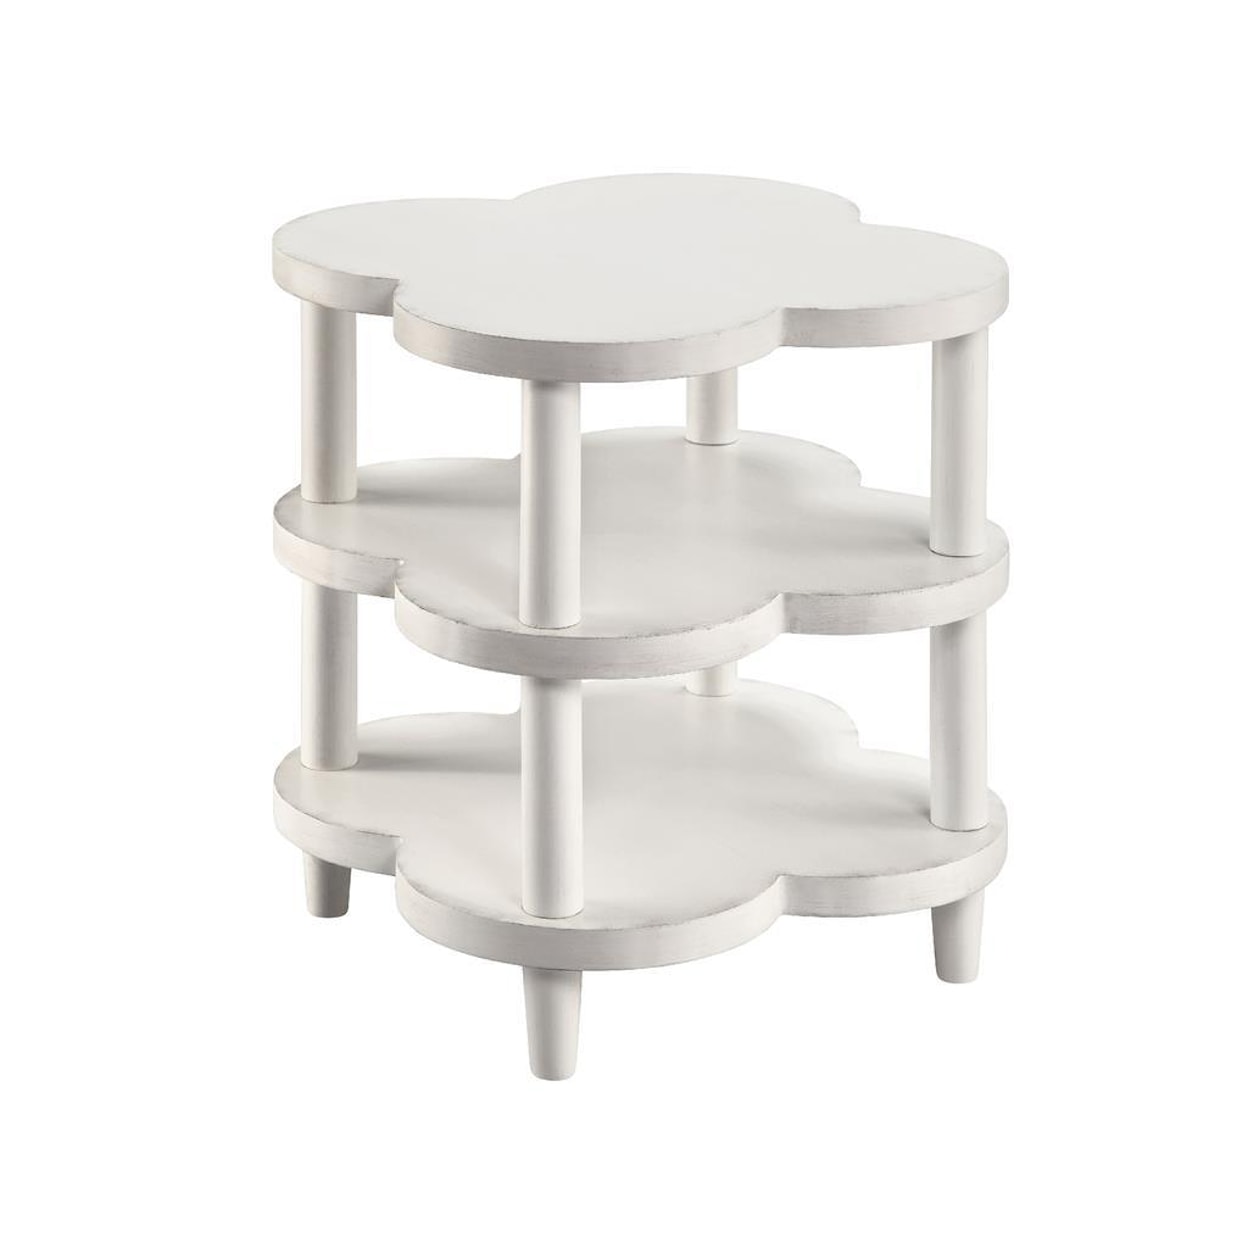 Stein World Accent Tables 2-Shelf Accent Table